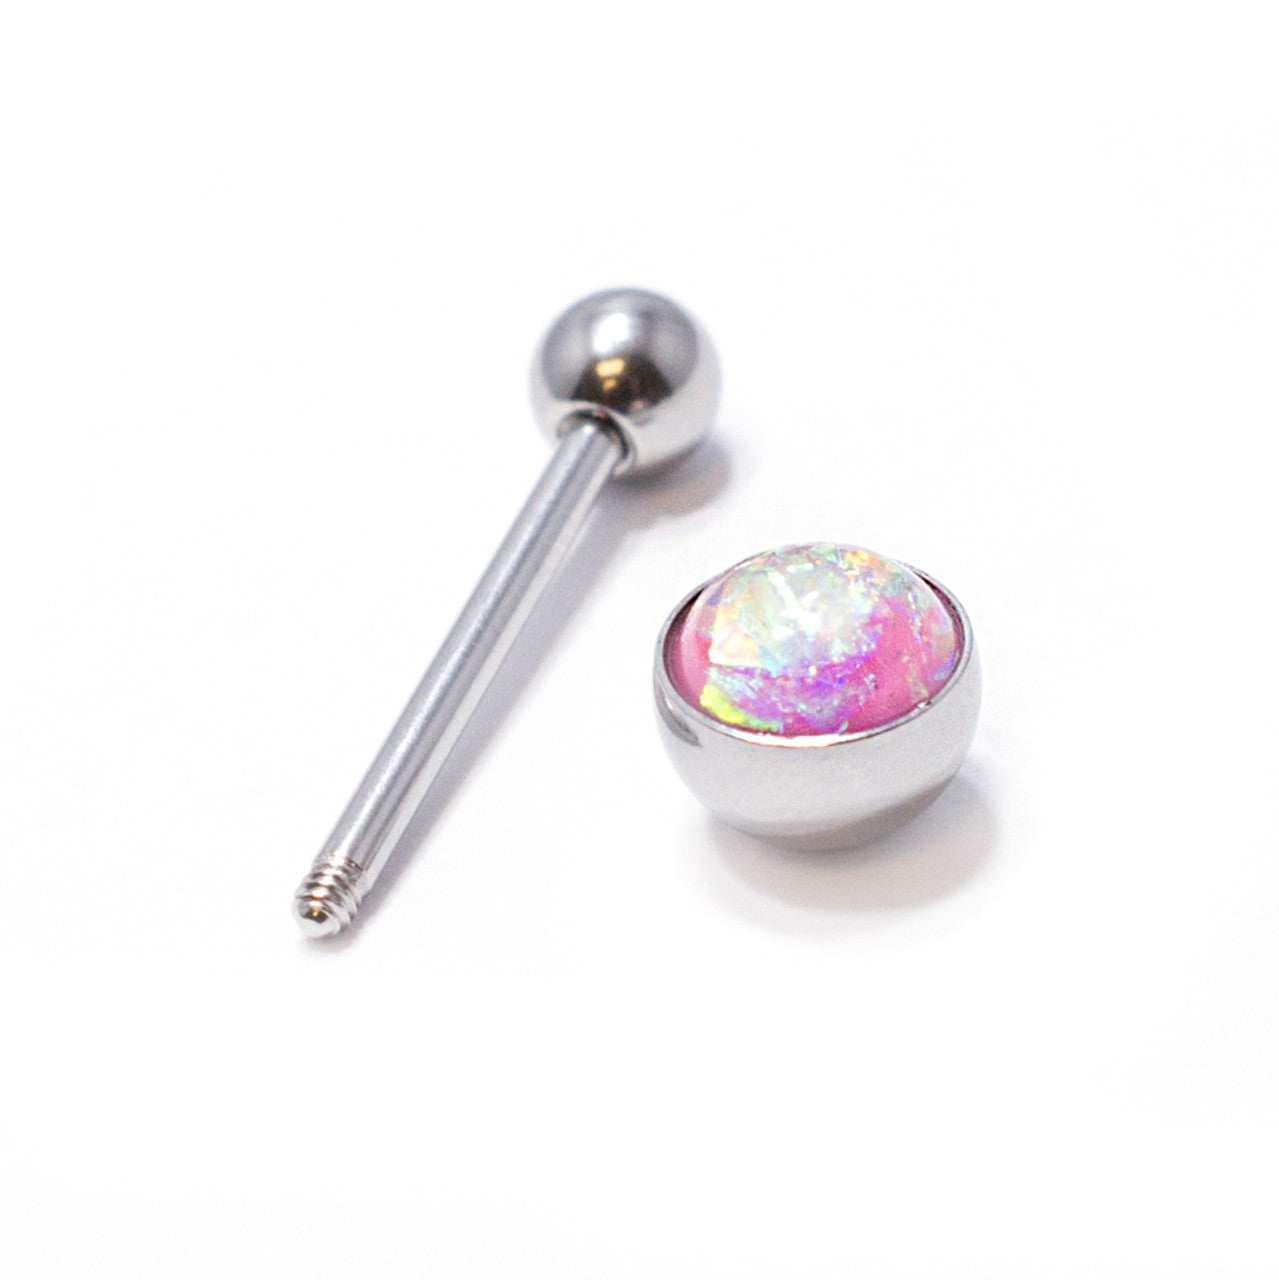 Surgical Steel Tongue Ring Straight Barbell 14 Gauge Opal Gem - 4 Pack